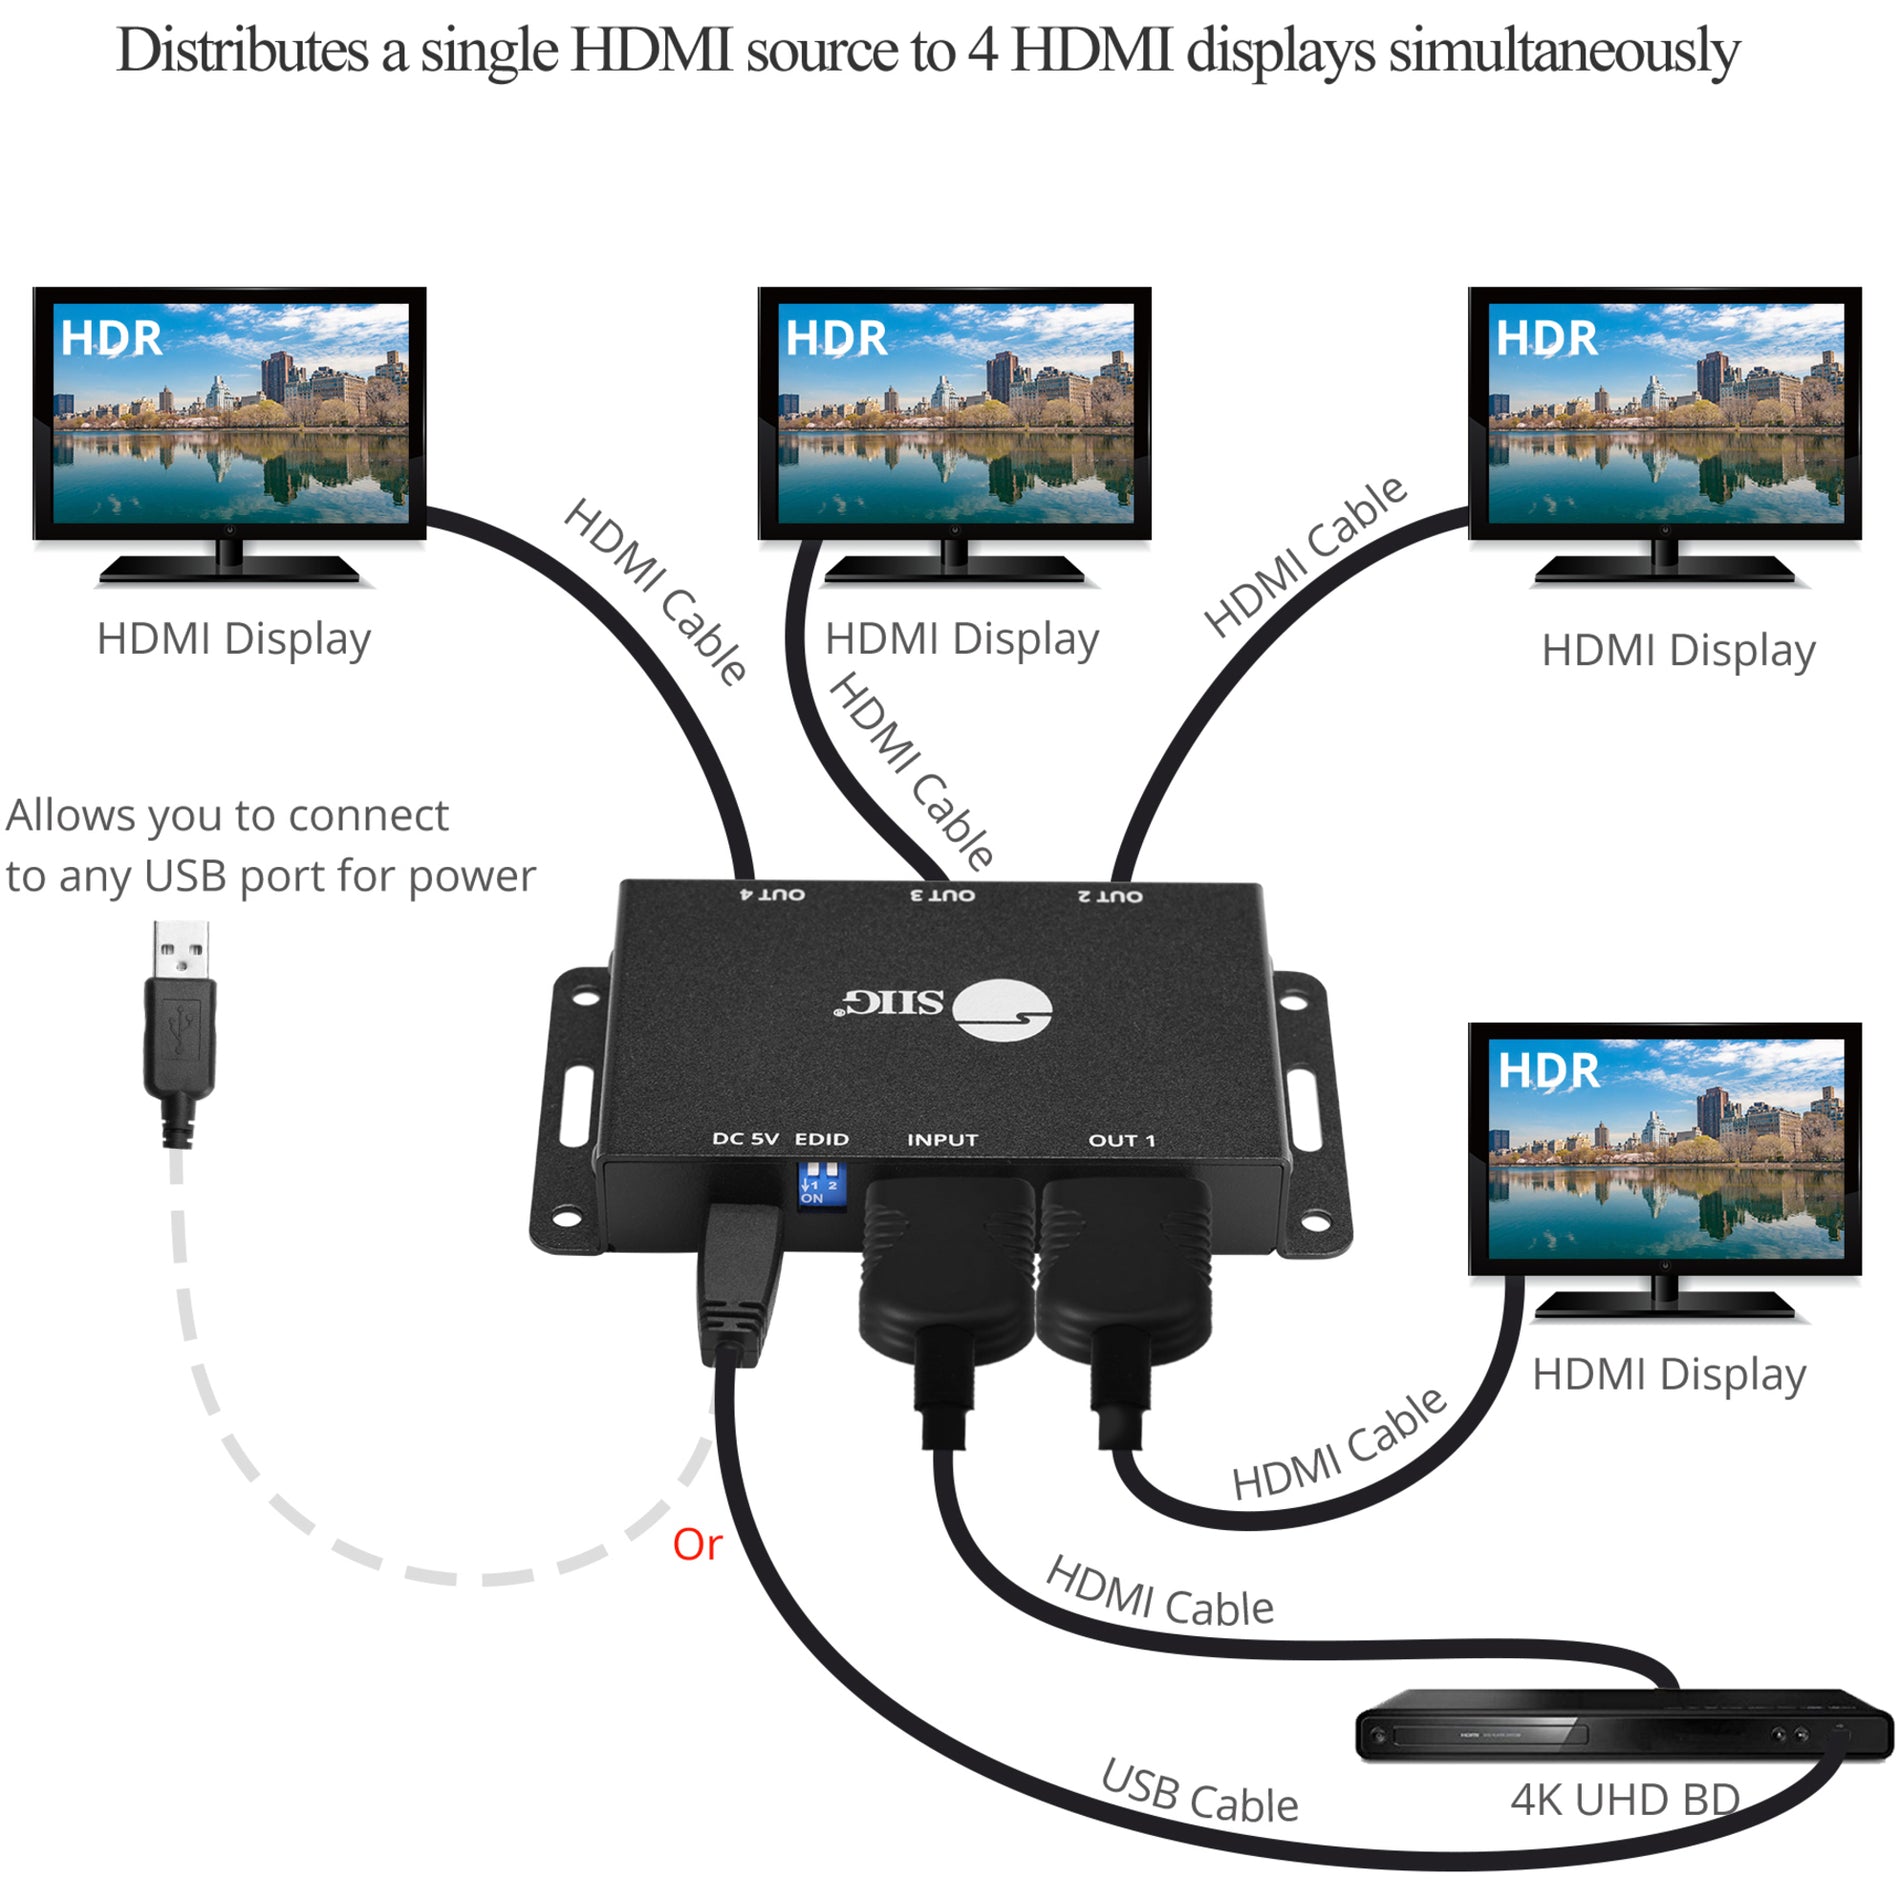 SIIG CE-H23L11-S1 4-Port HDMI 2.0 HDR Mini Splitter Amplifier with EDID Management, Splits HDMI Video/Audio Signals to 4 HDMI Displays